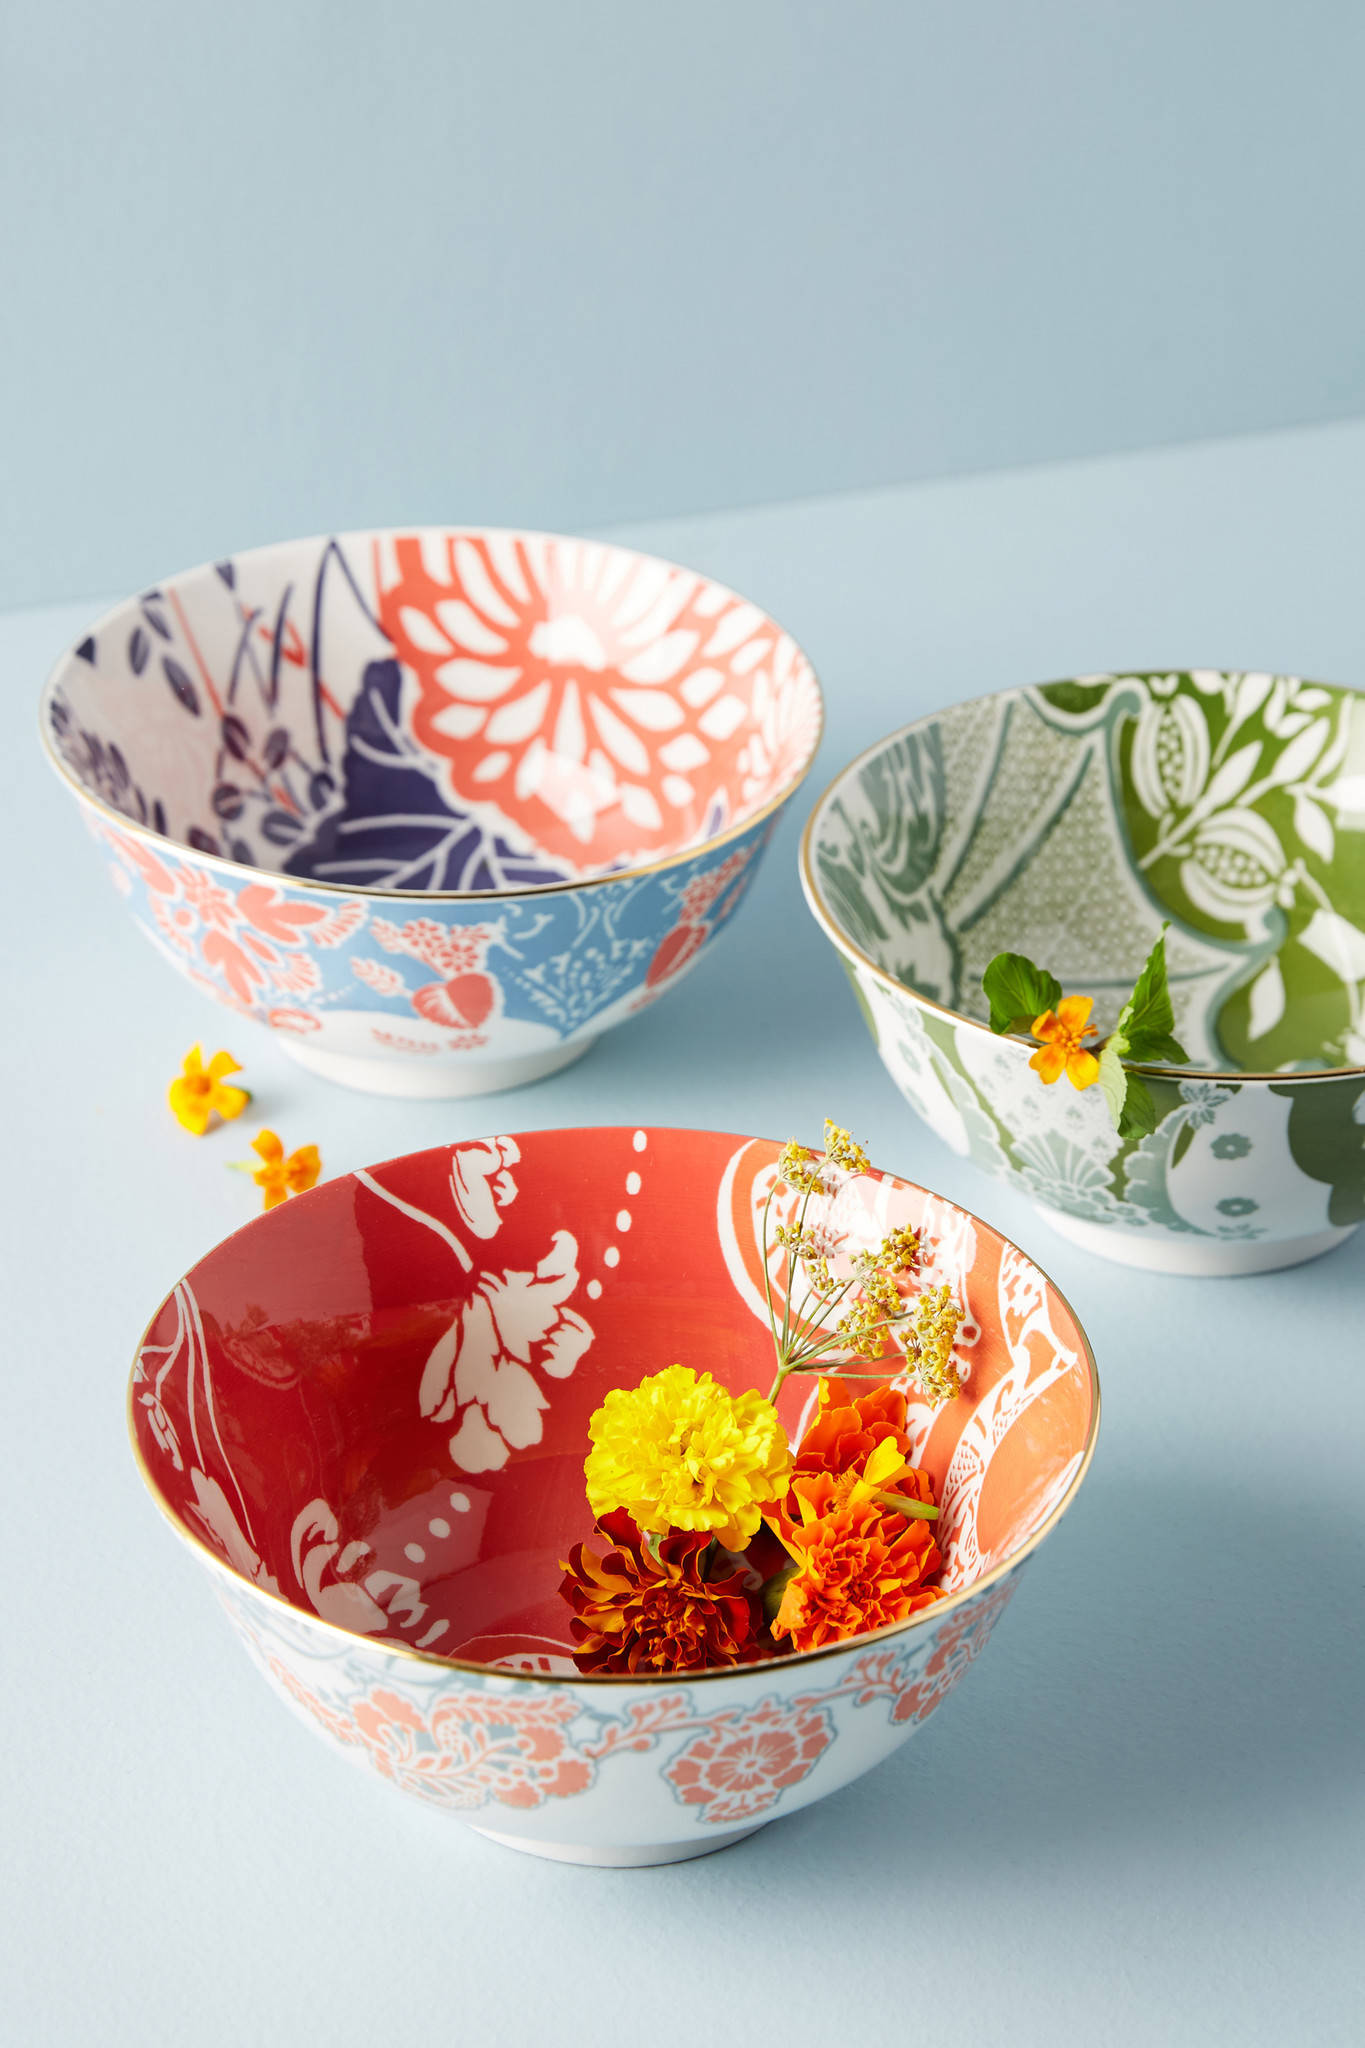 Bowl Game: Evanie cereal bowls, $14 each at Anthropologie. Credit: Anthropologie